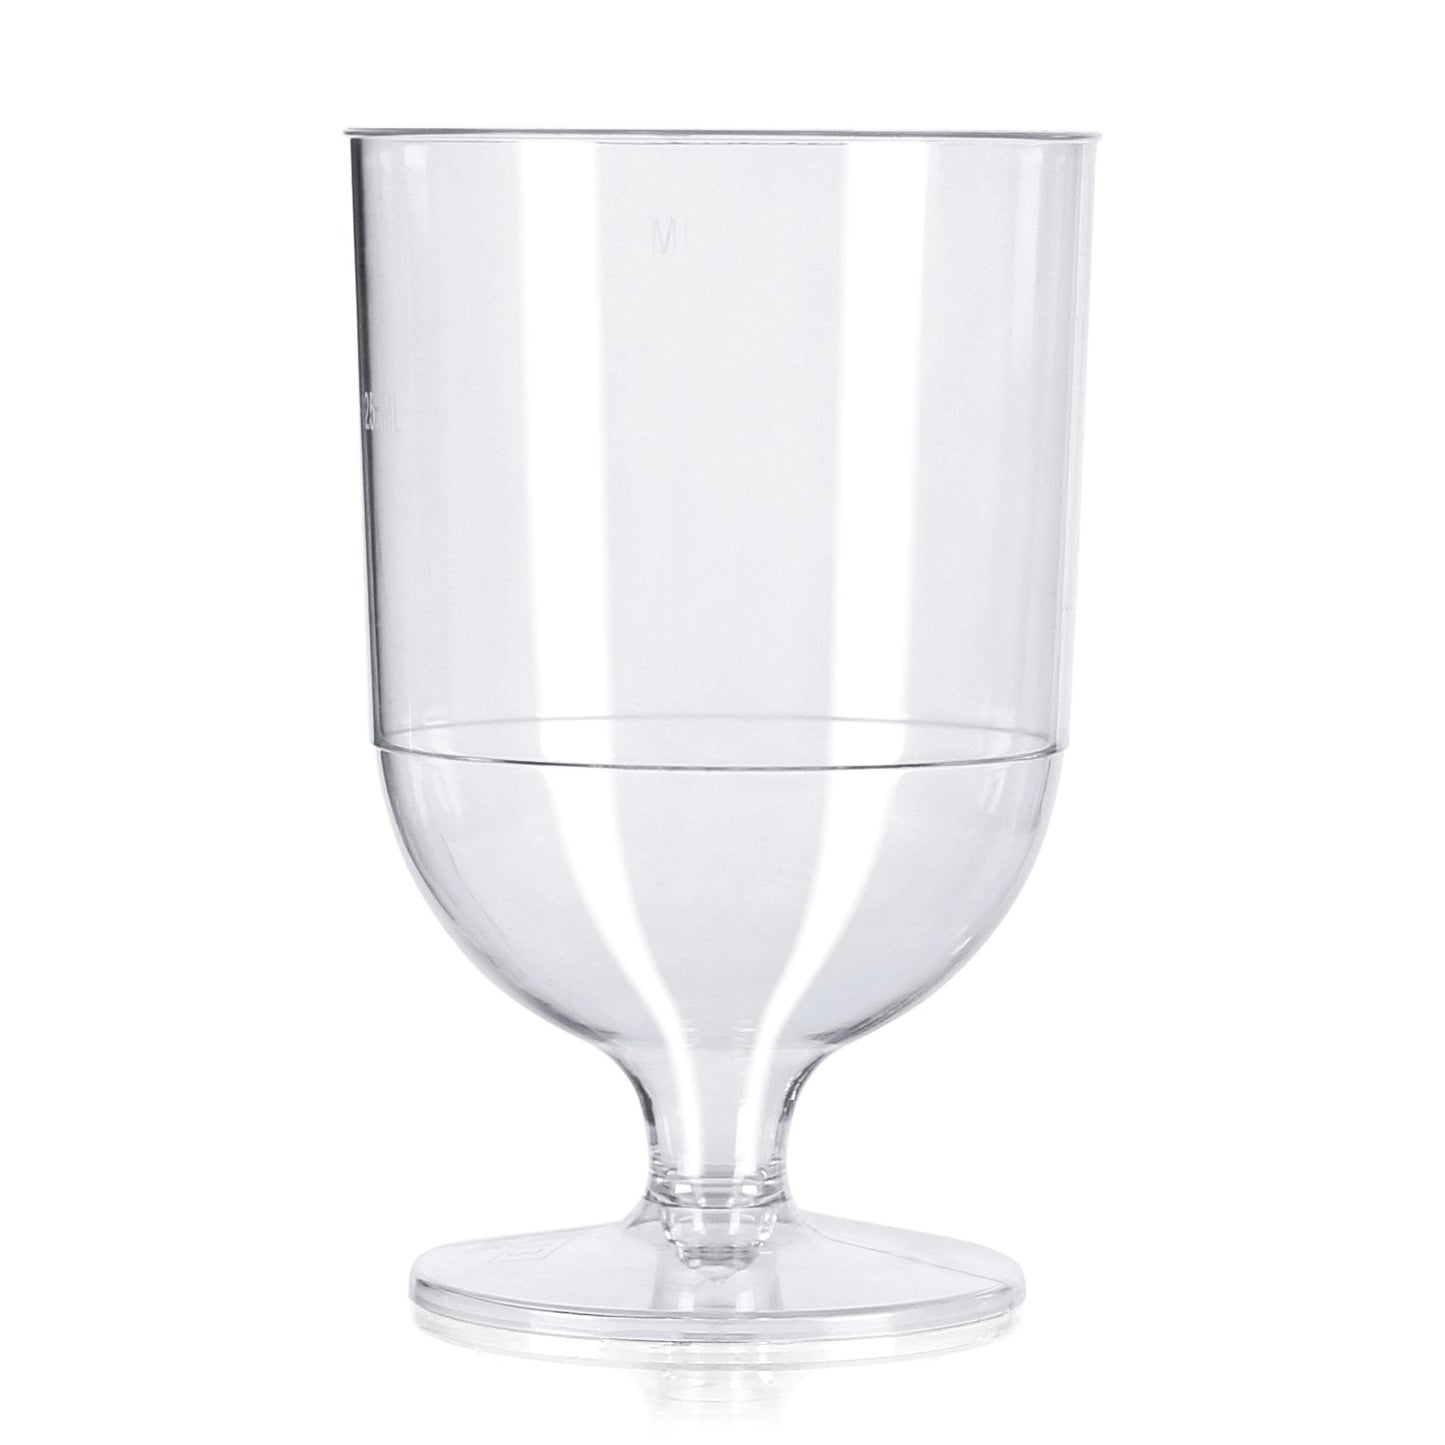 50 Pack x Clear Disposable Wine Glasses - CE Marked at 125ml 175ml - One Piece - Plastic